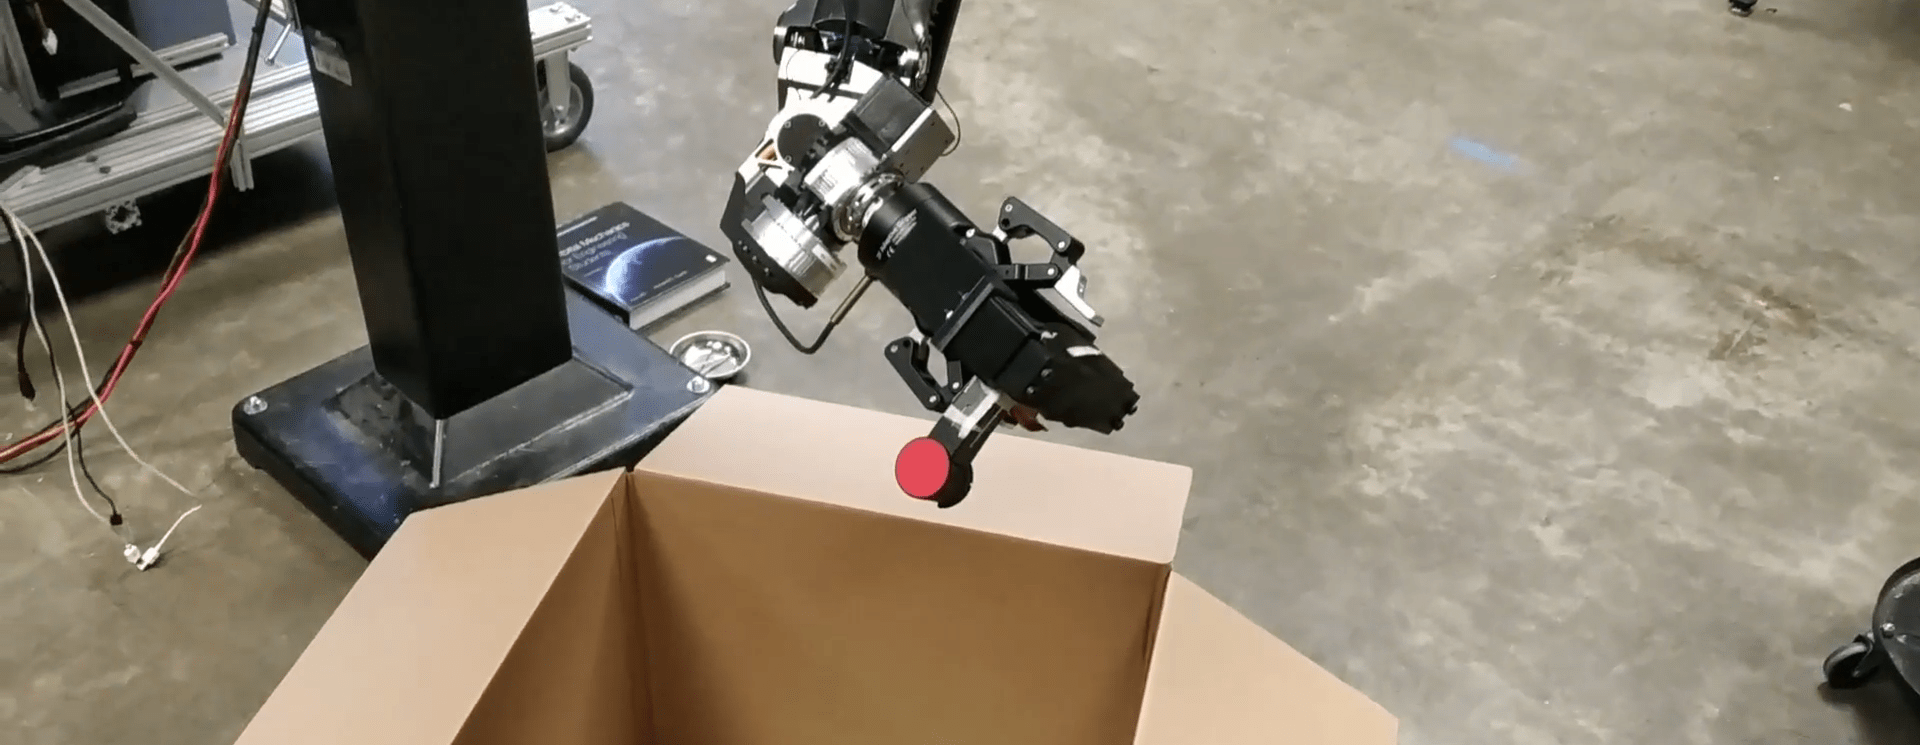 Spray Painting Robot - Featured image